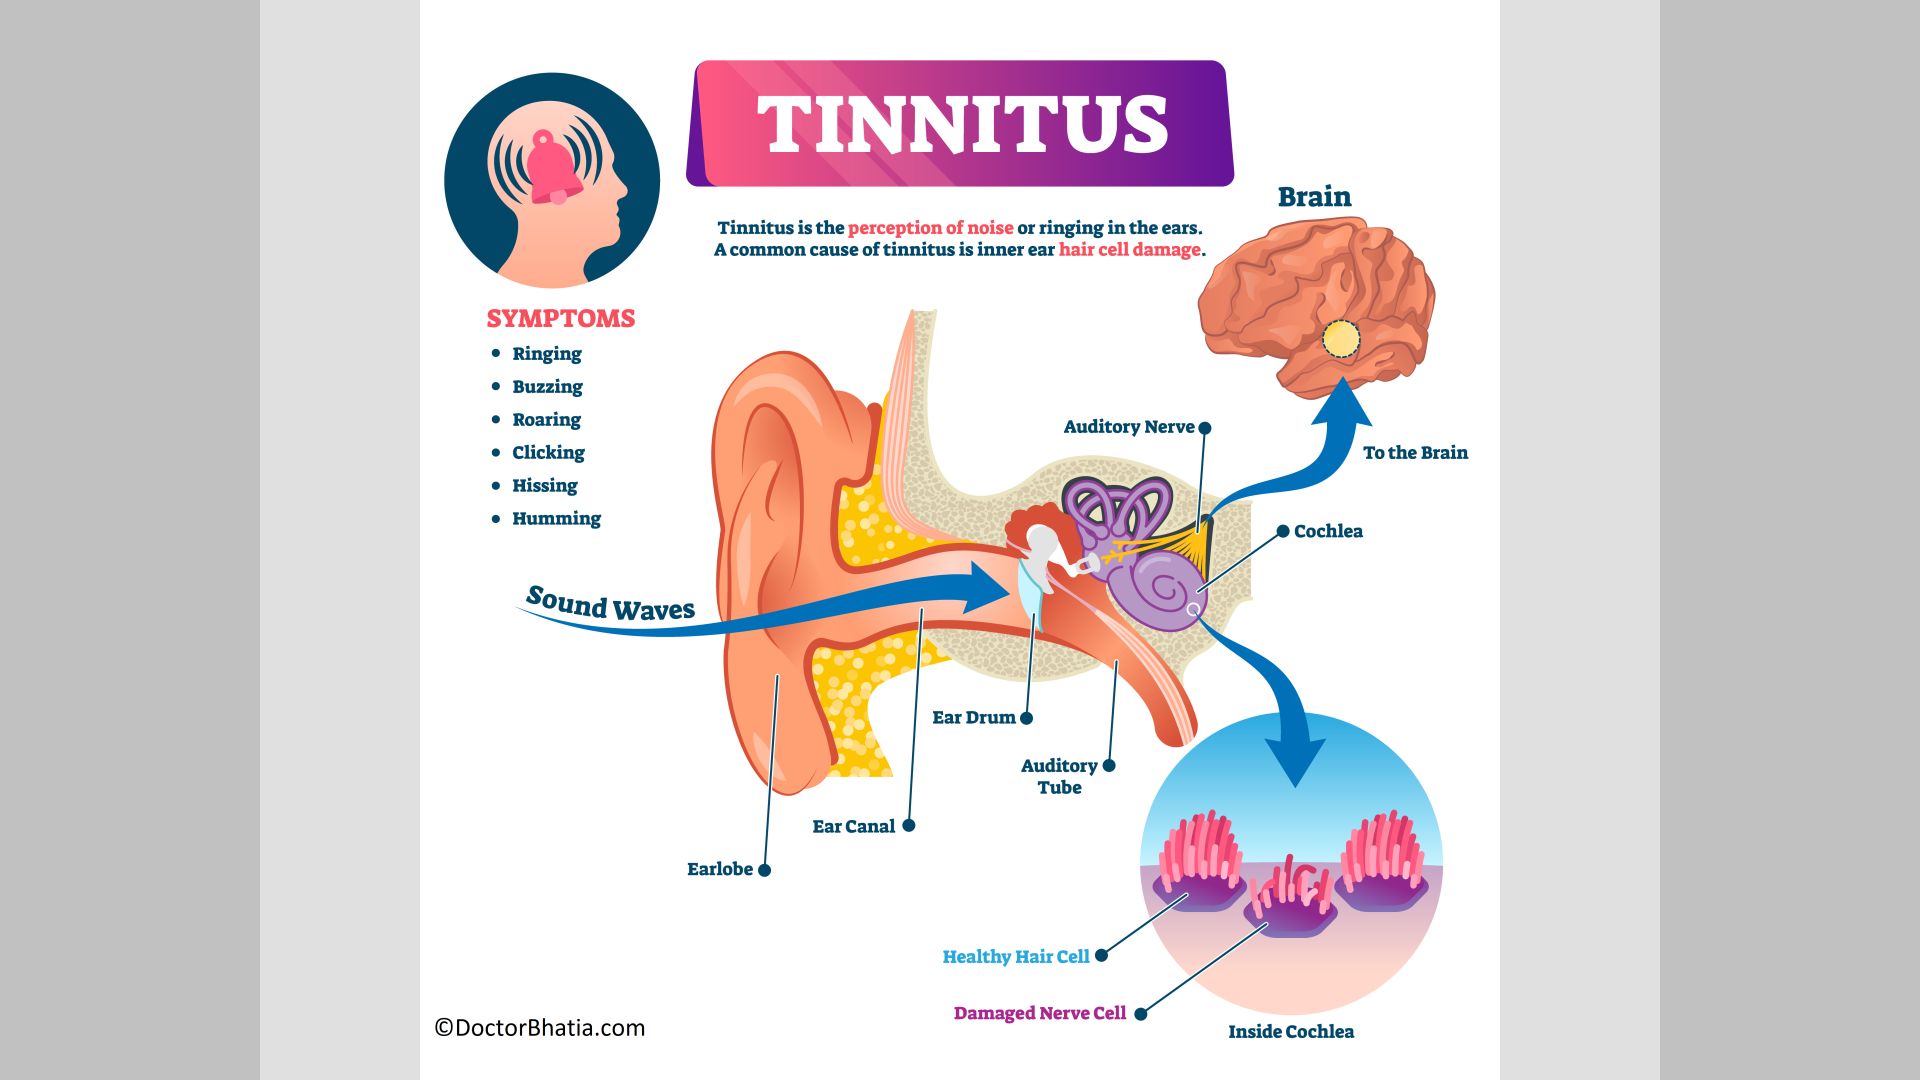 Tinnitus: Why Your Ears Might Be Ringing